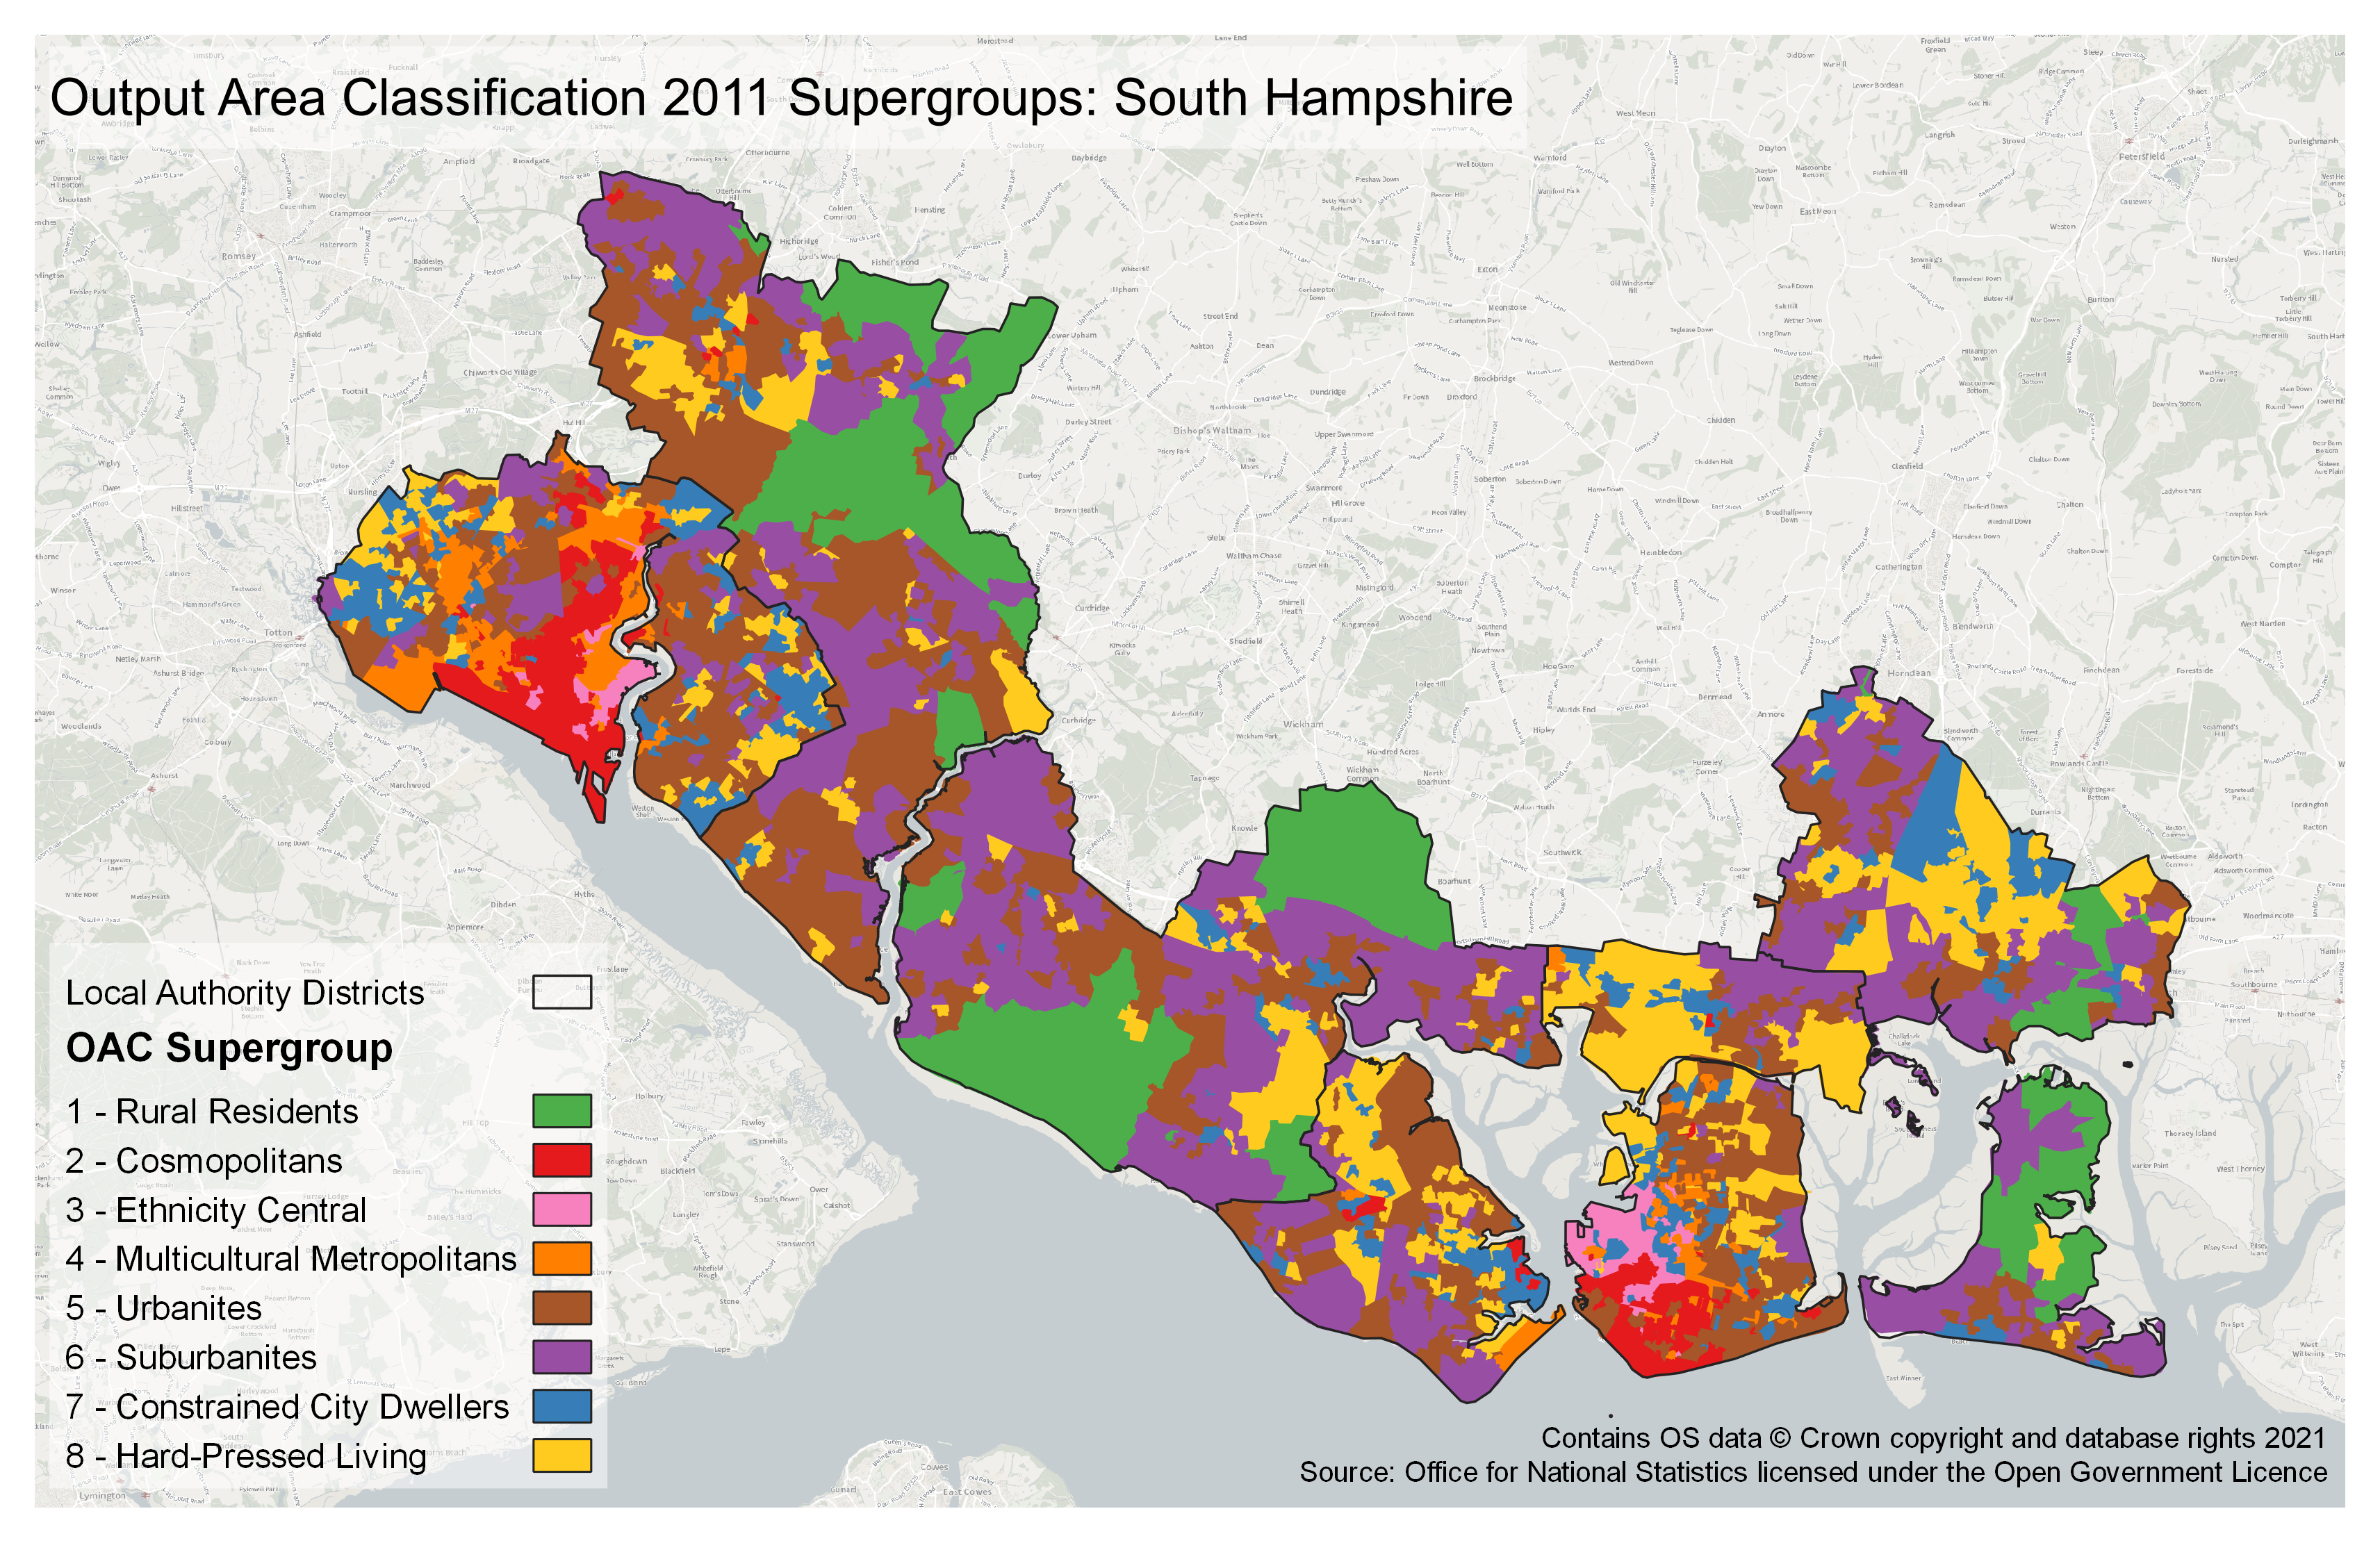 Output Area Classification of Southern Hampshire